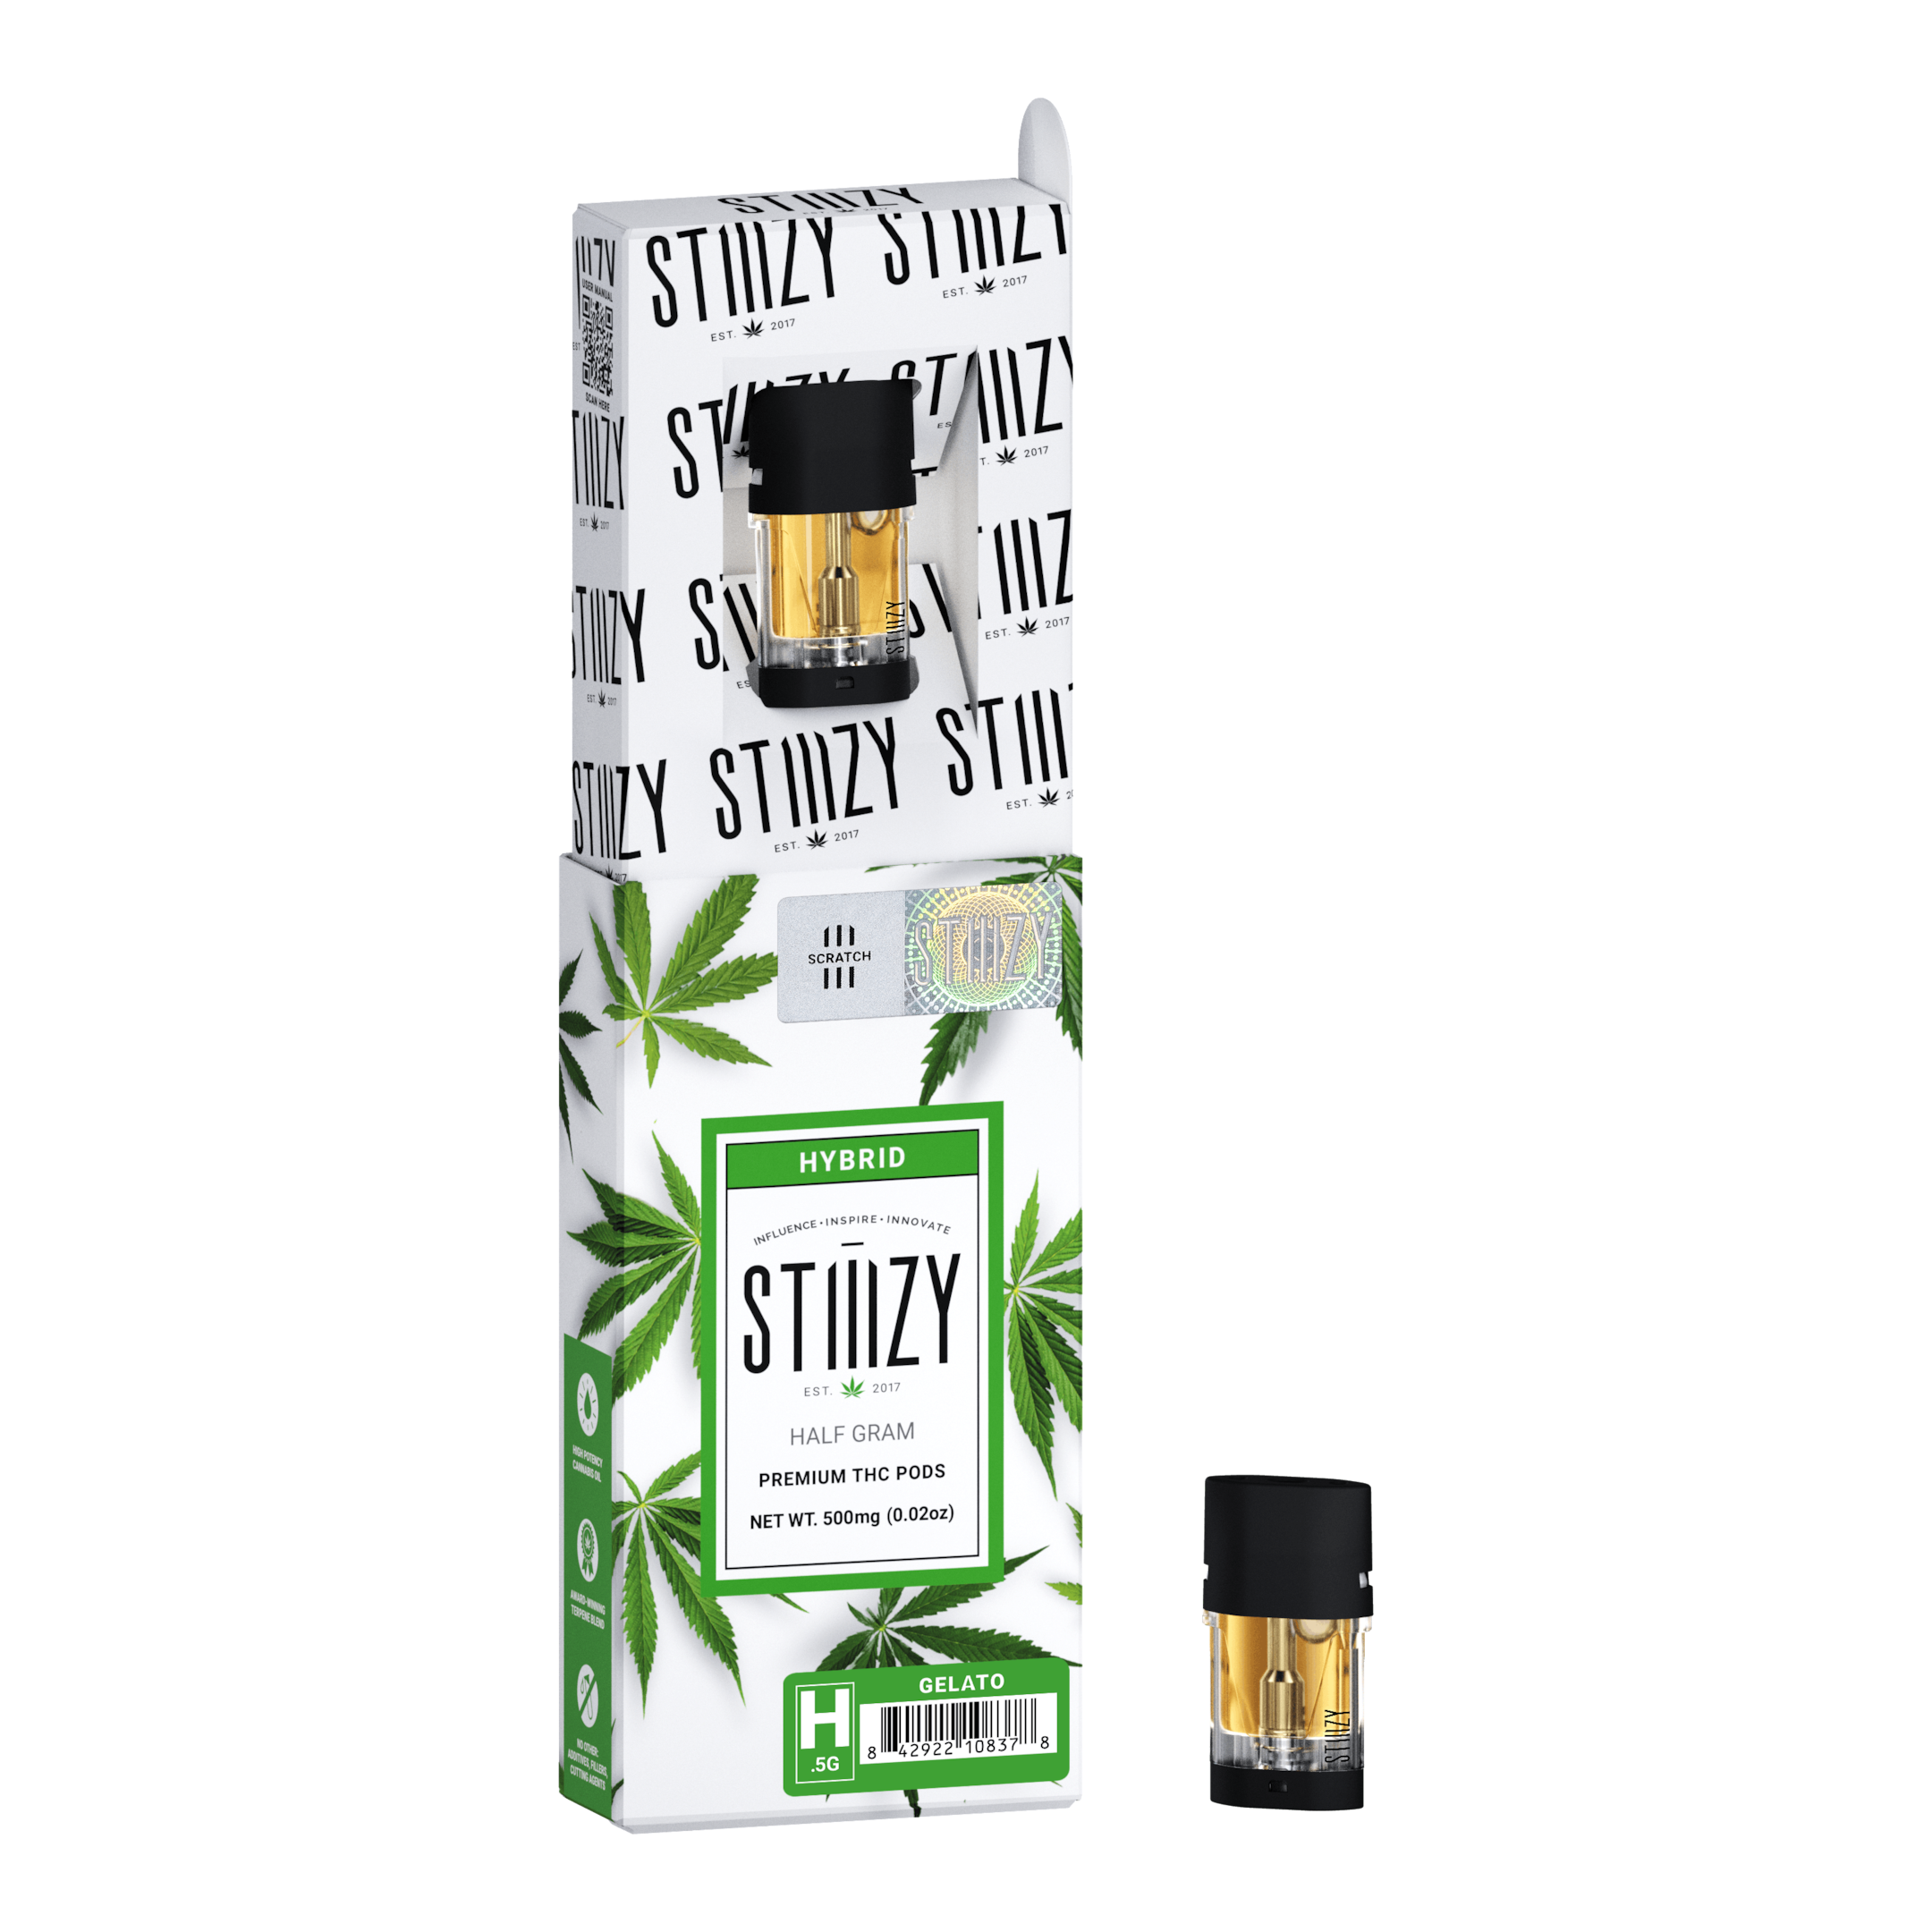 Original THC pods with the Gelato strain offer a high level of purity.